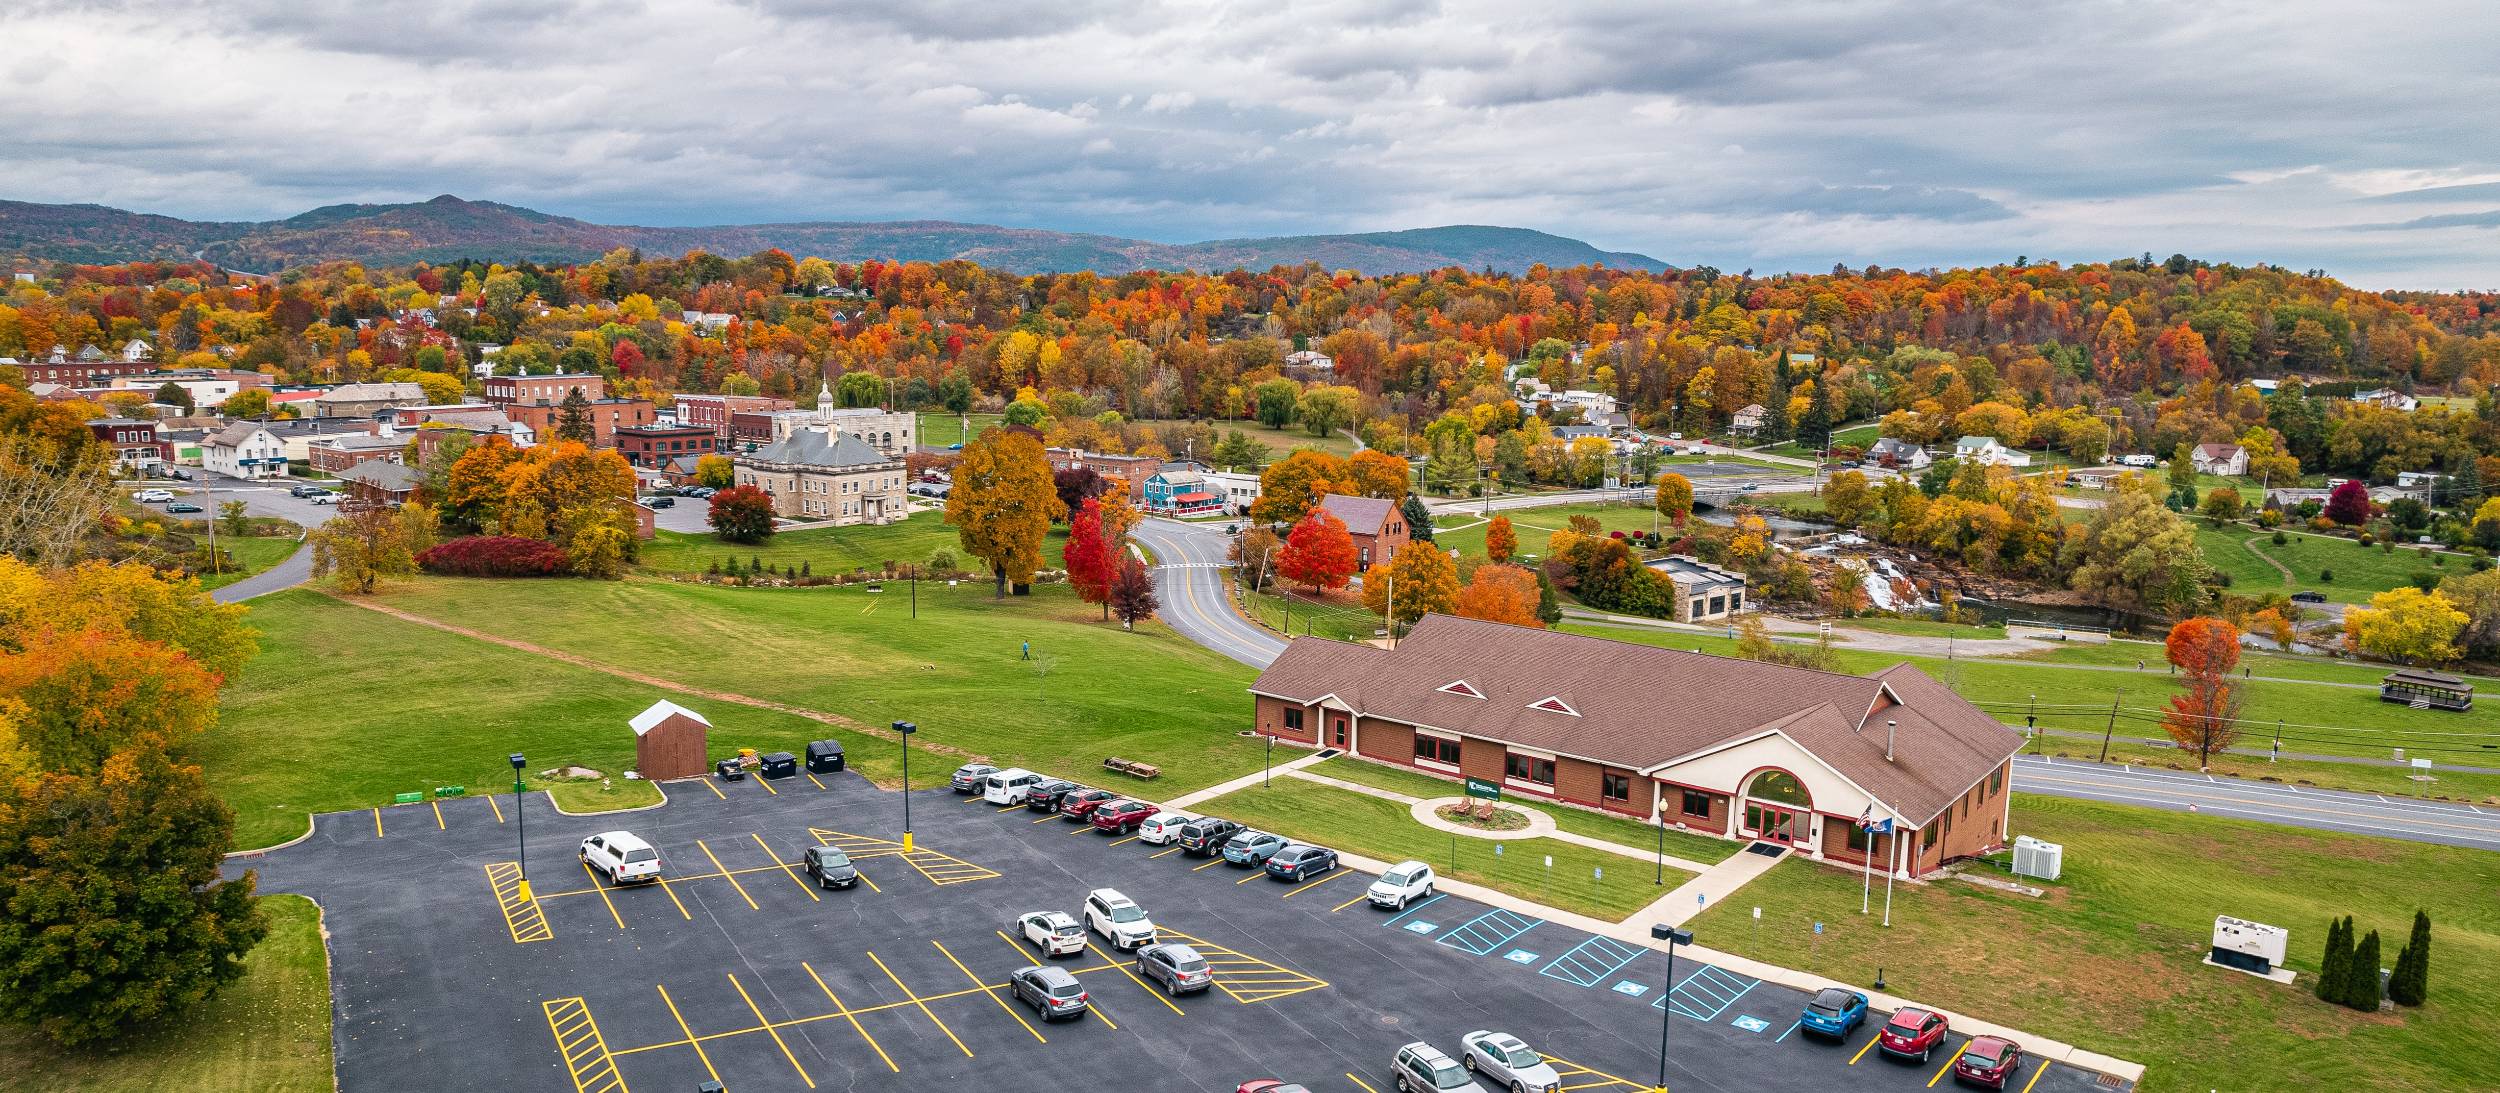 A fall landscape with the college's Ticonderoga campus building set in the foreground